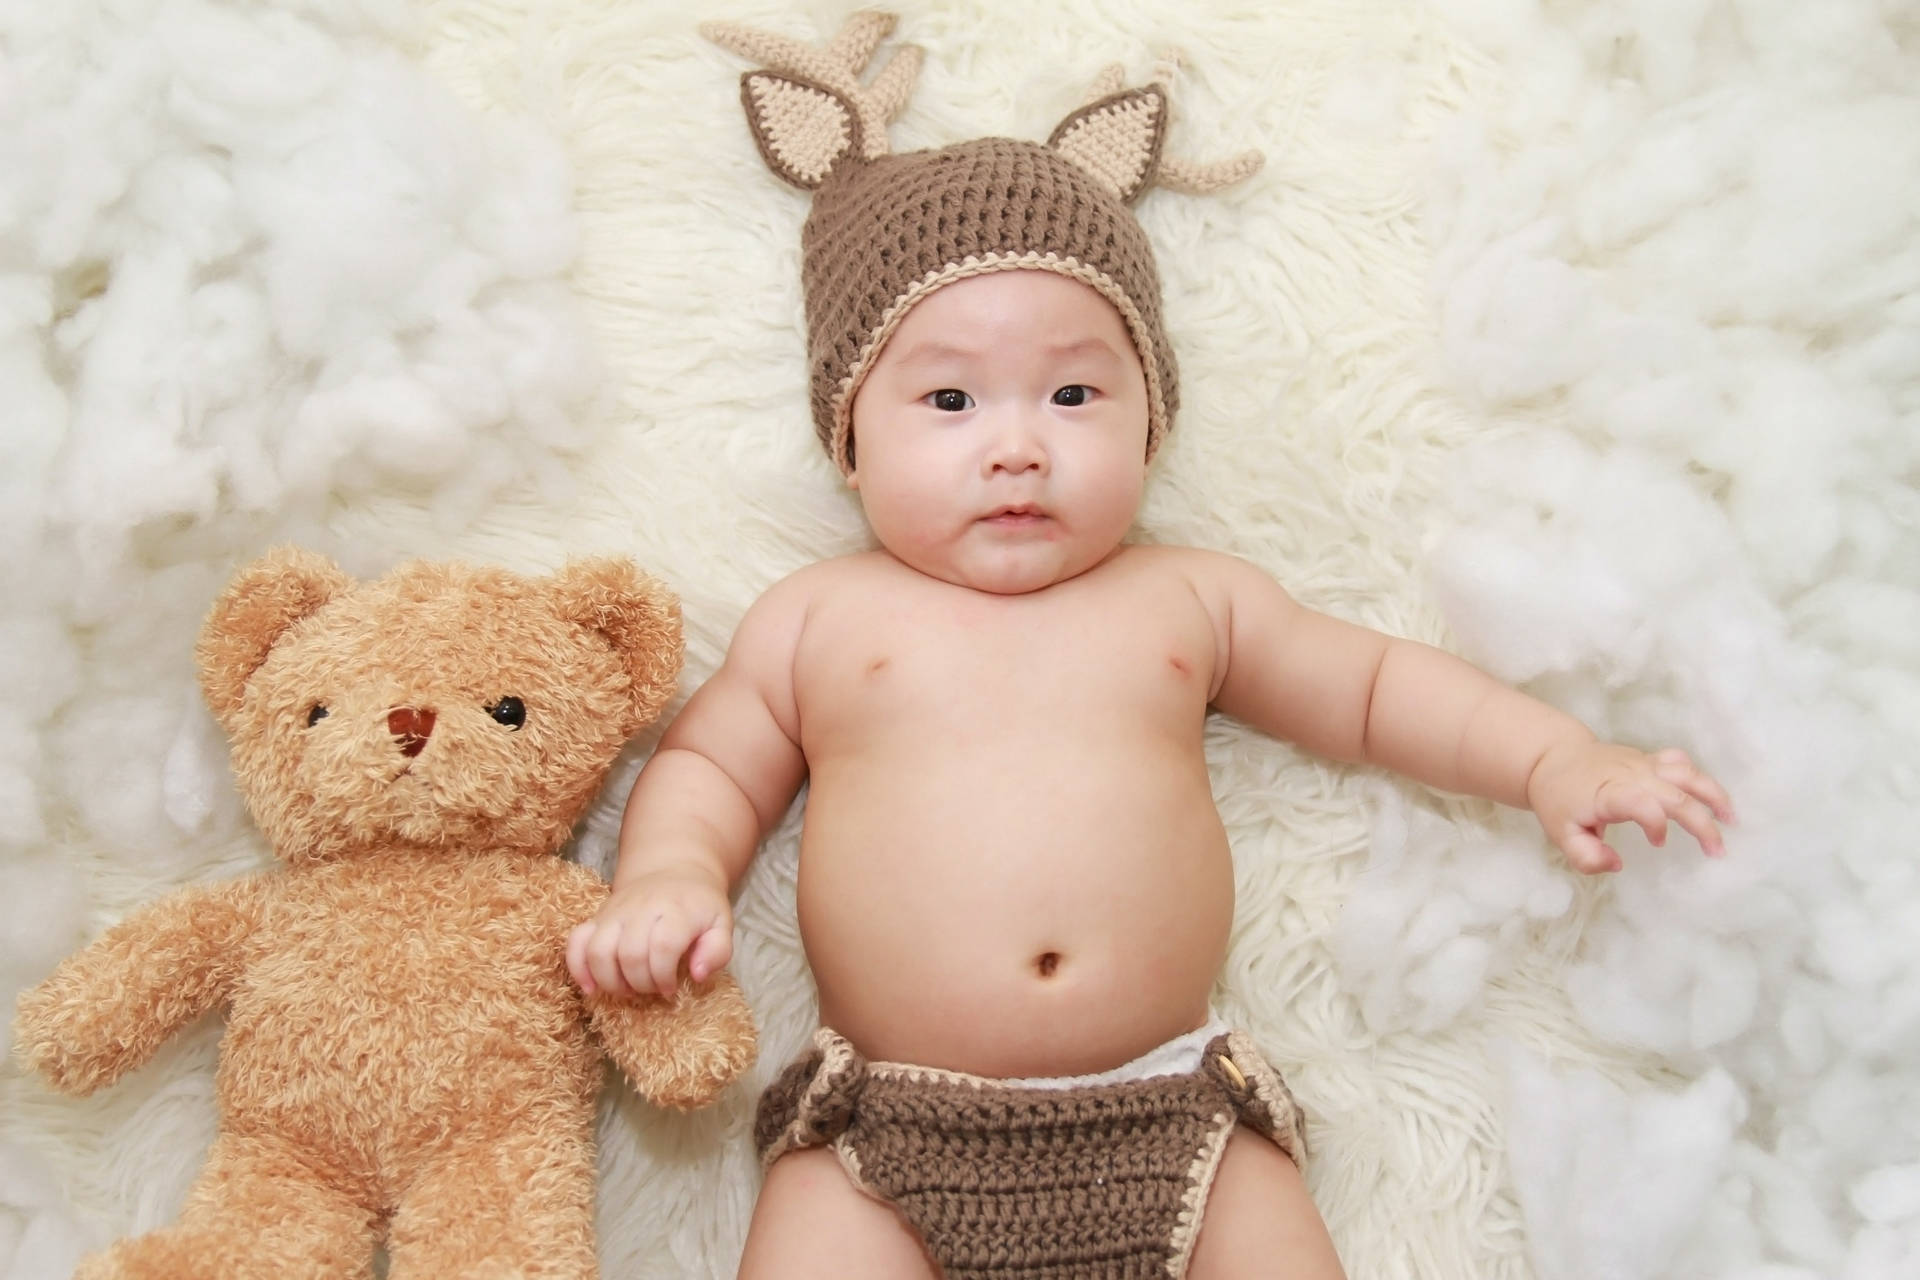 Cute Baby With Knitted Hat And Stuffed Bear